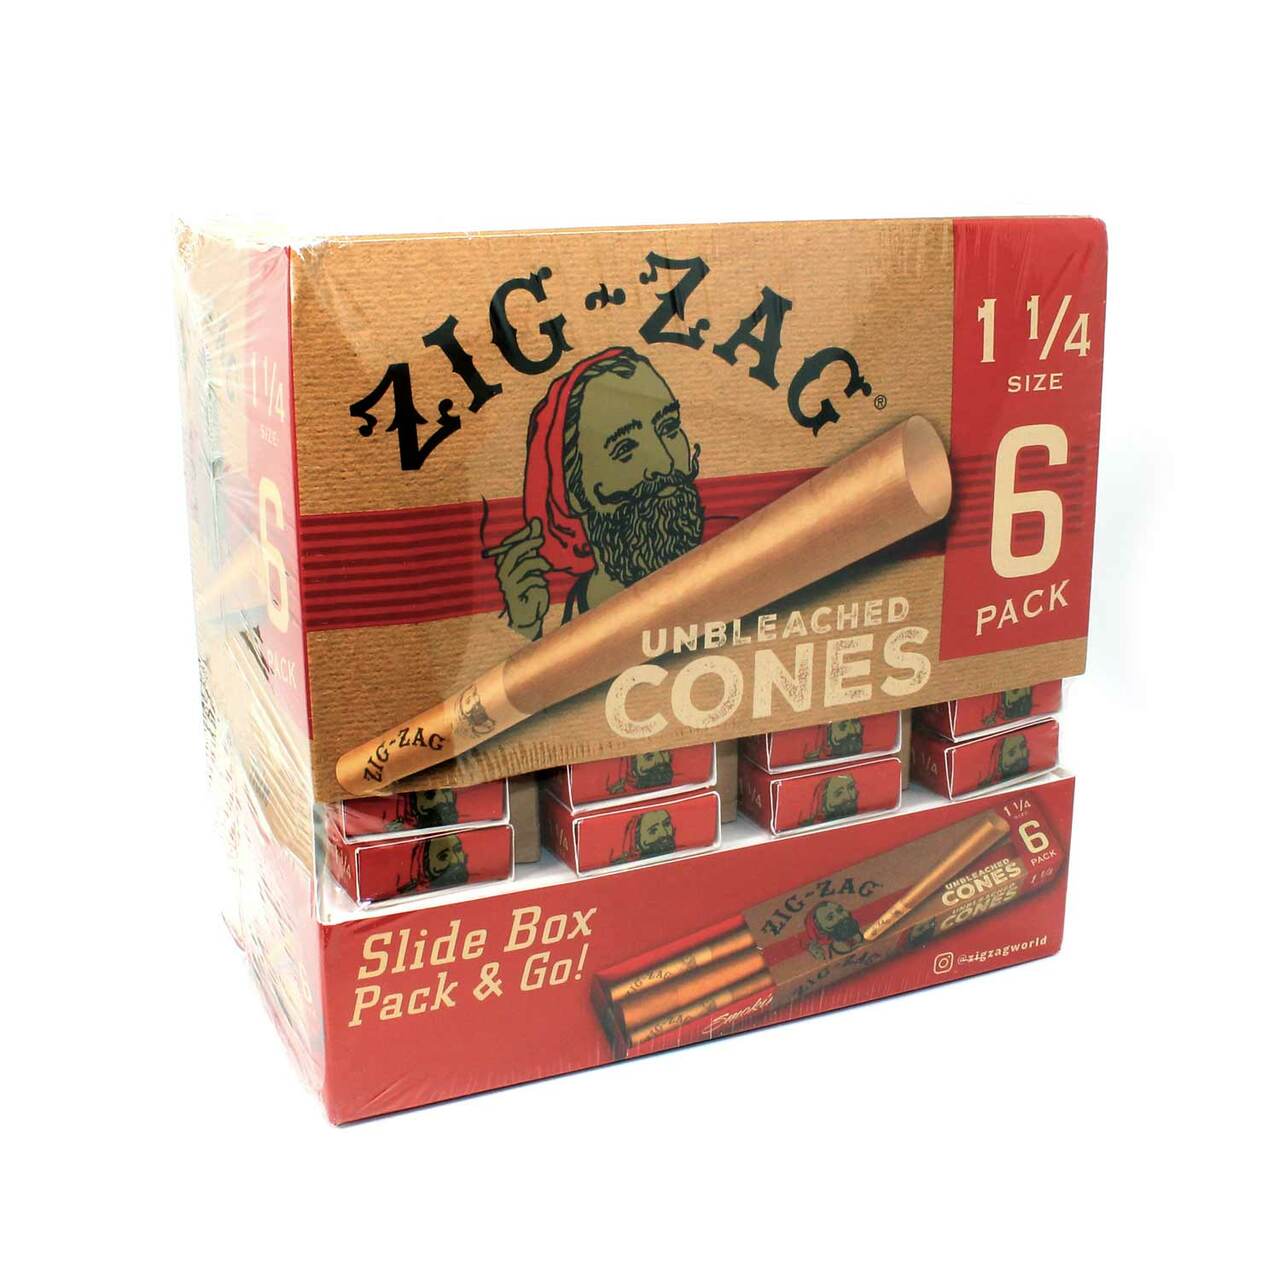 ZIG ZAG Unbleached Paper Cones 36ct Slide Box in 1-1/4" and King Size